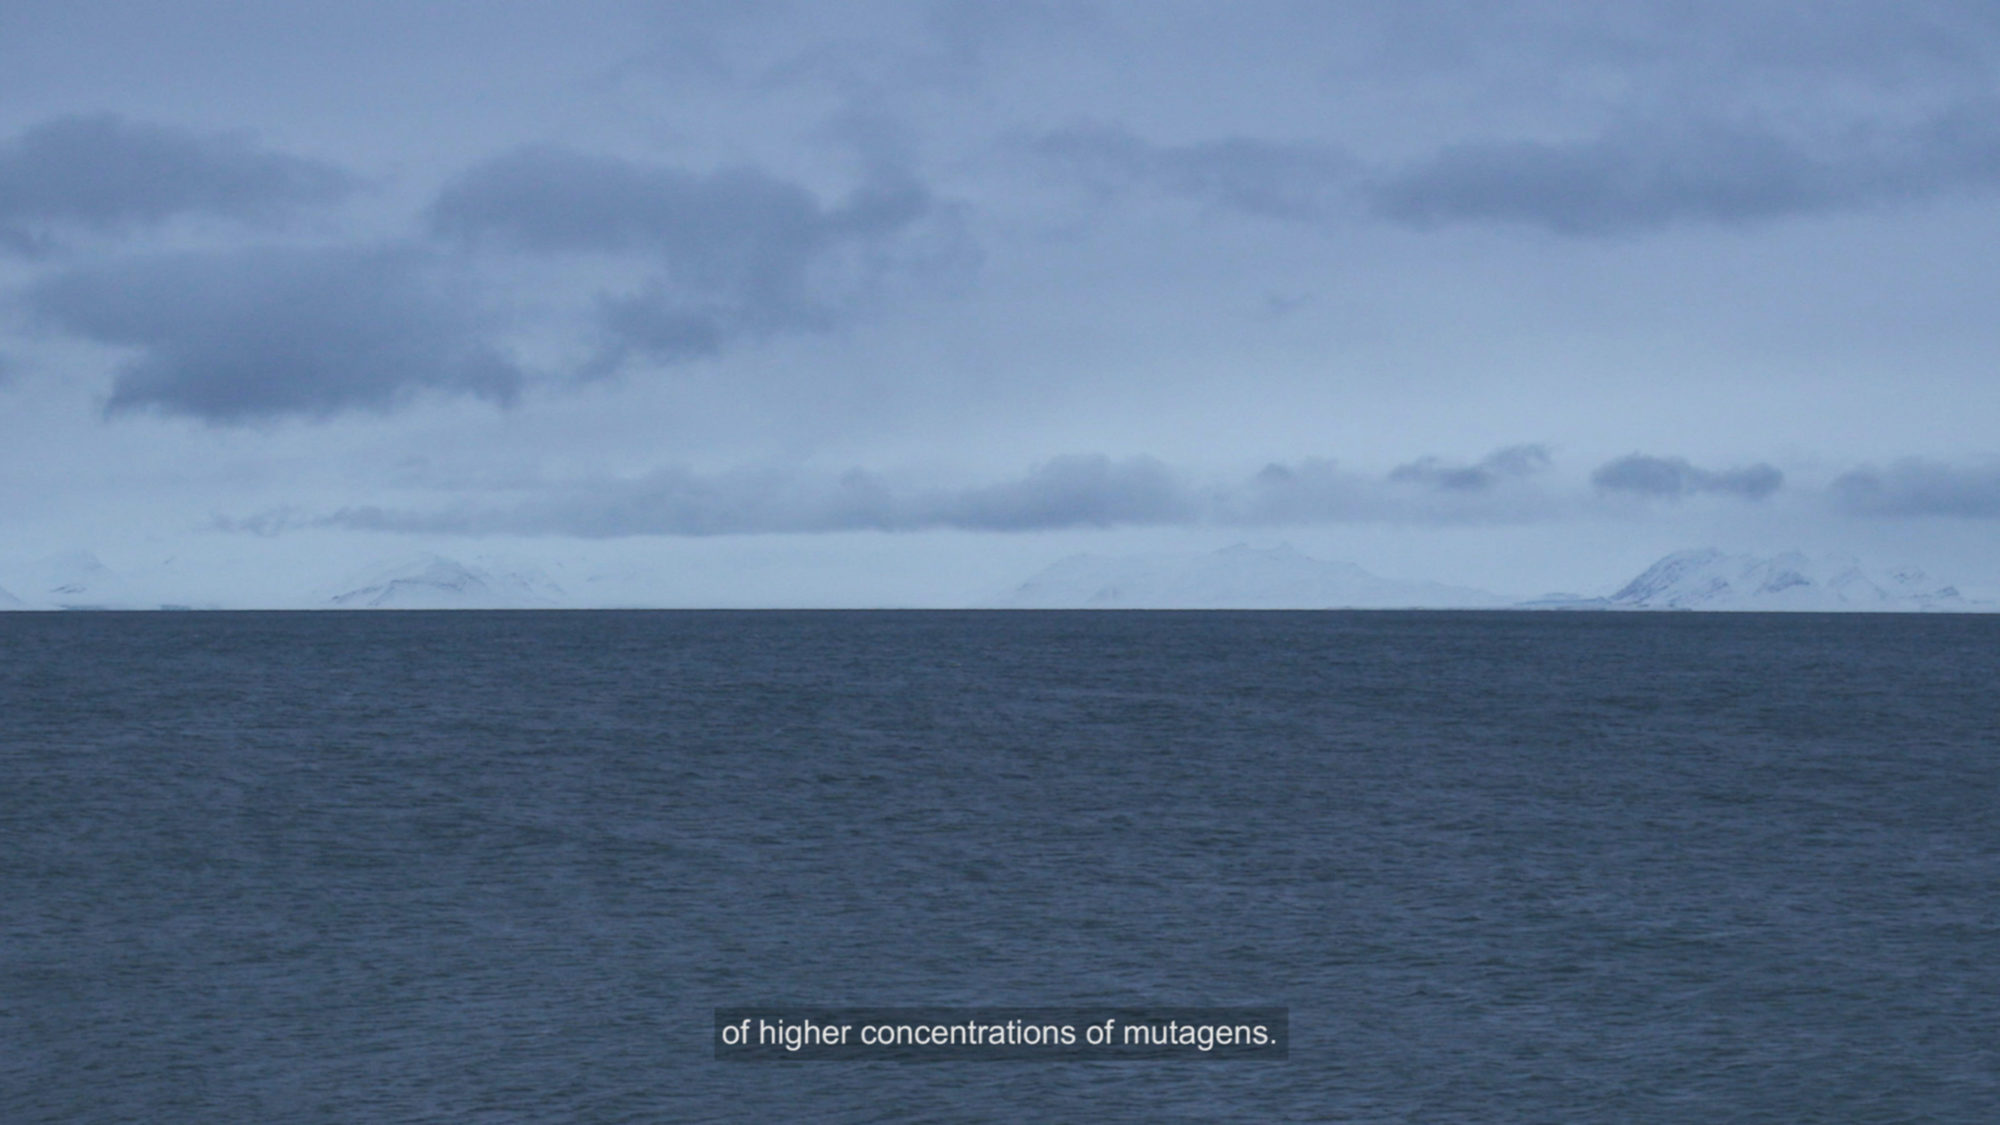 video still of large ocean with dull blue skies